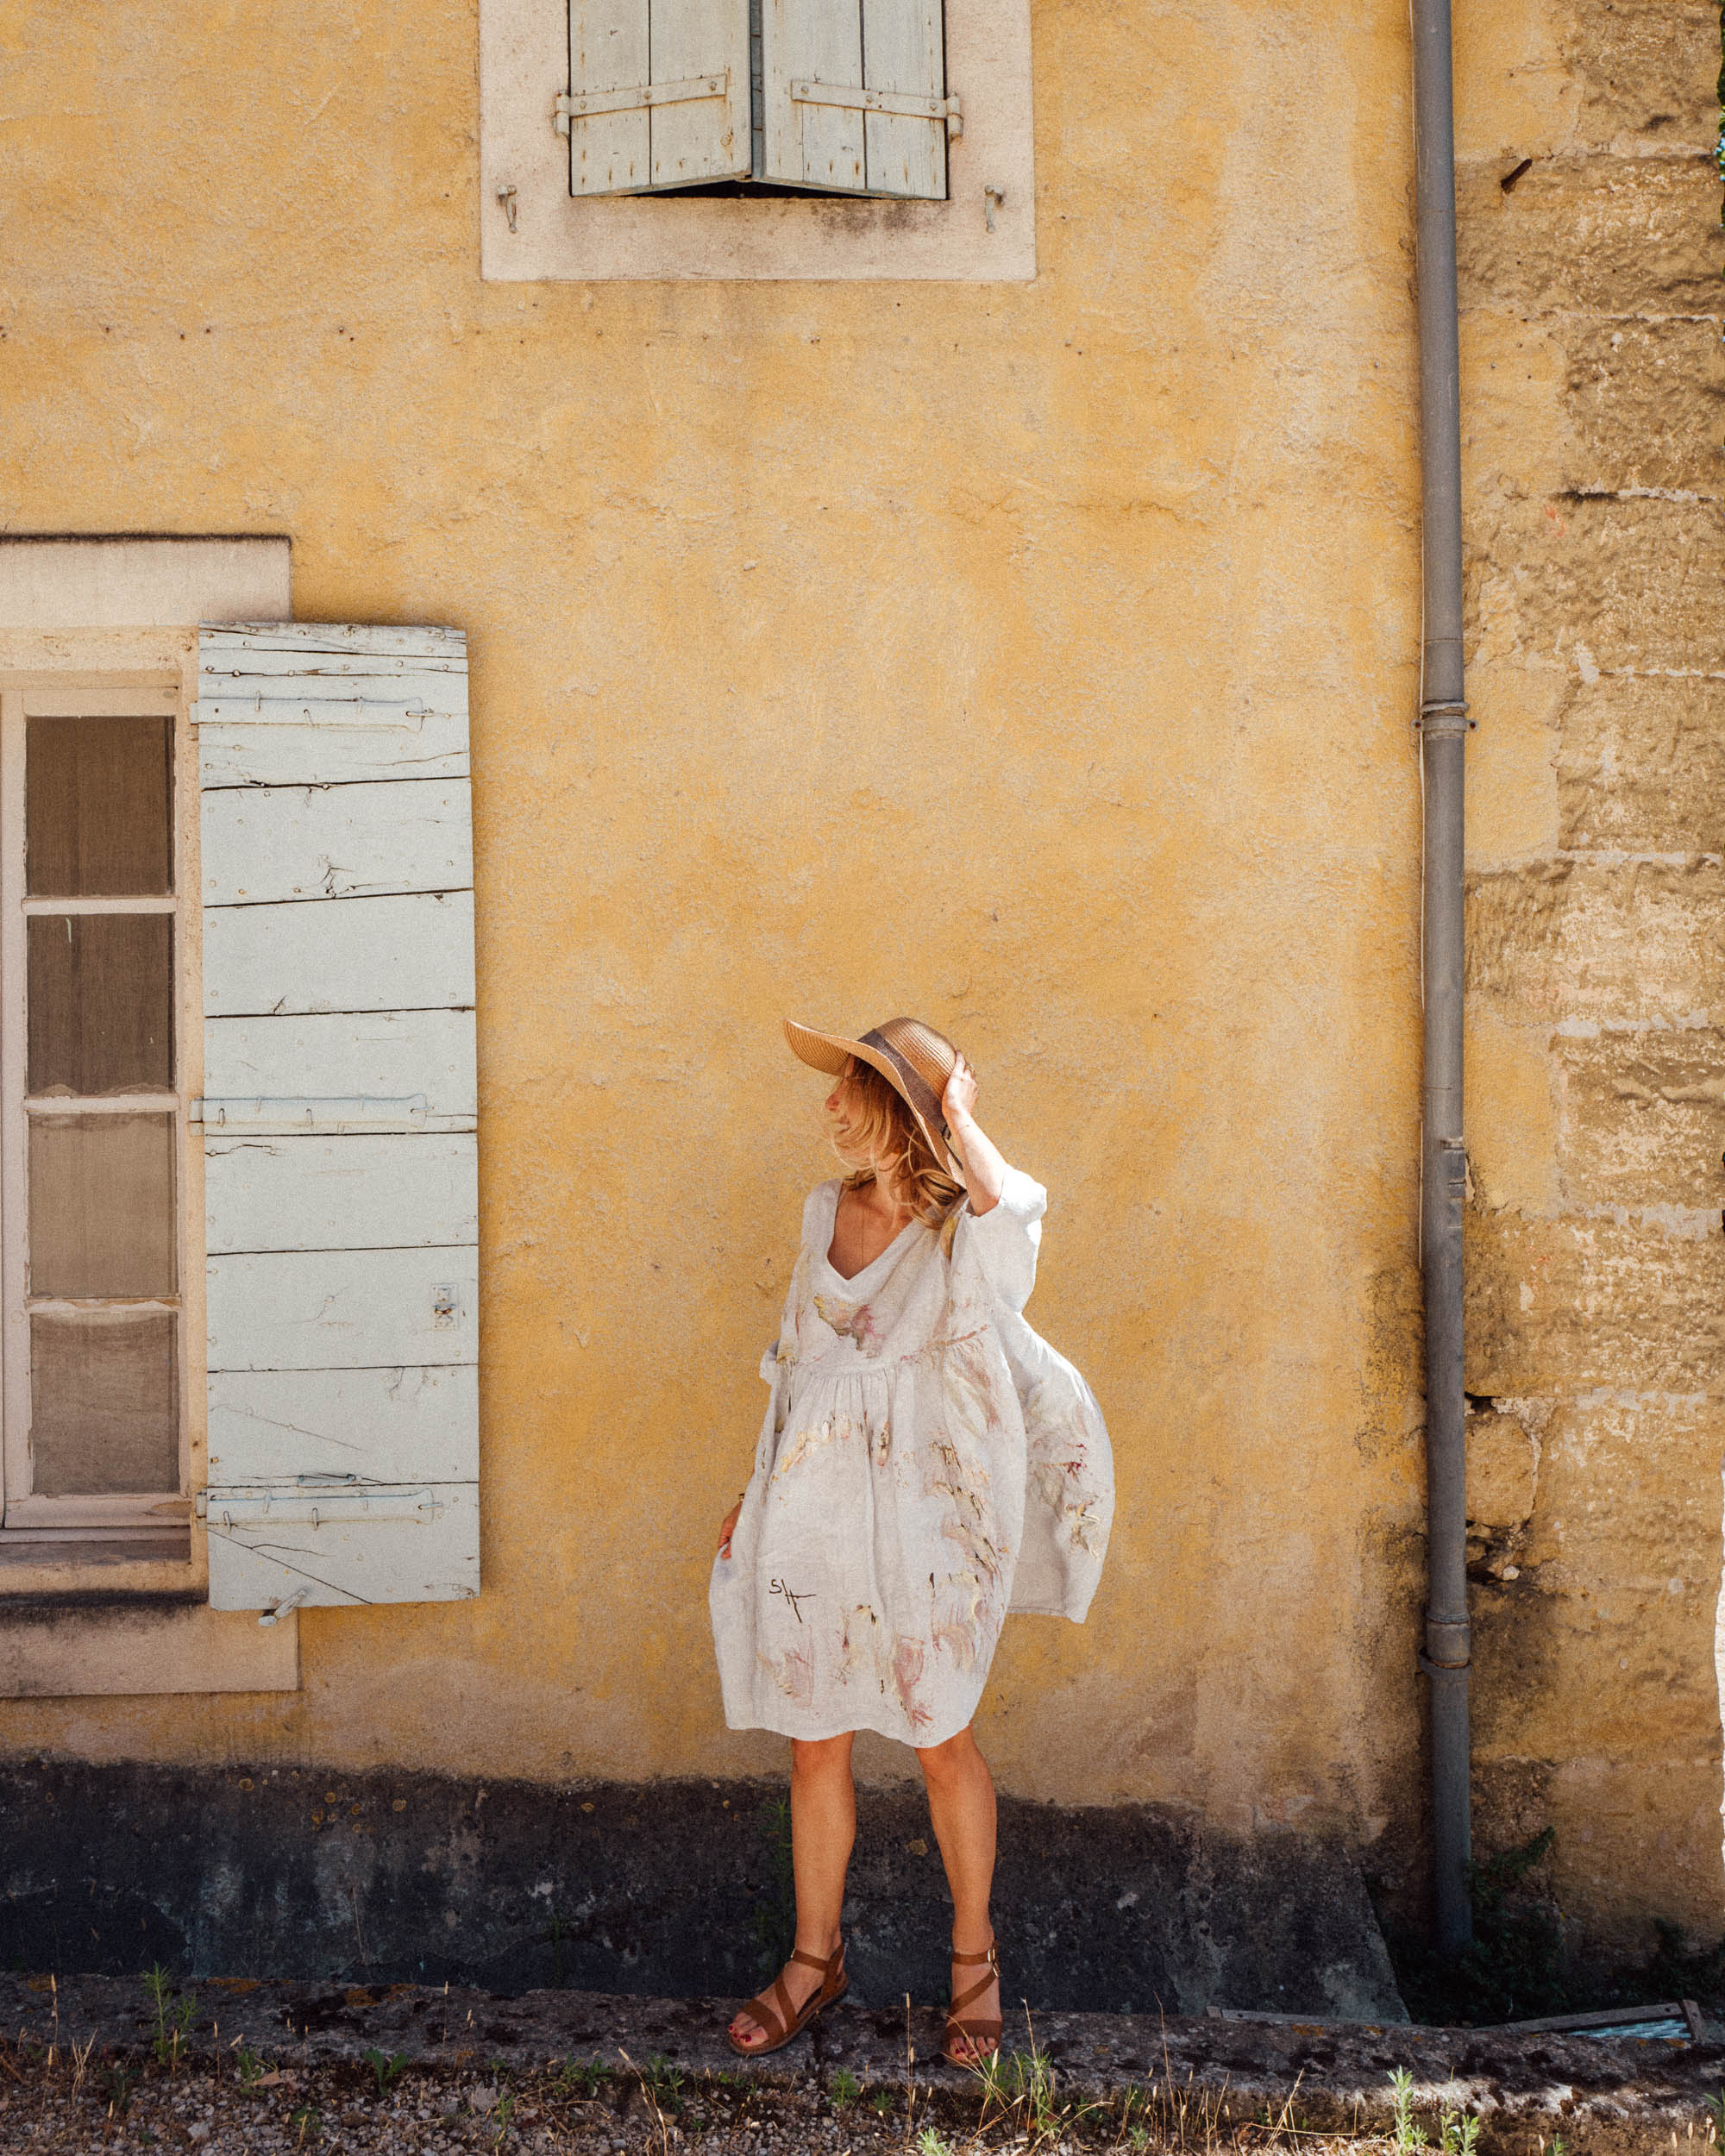 Pastels and presets from the South of France